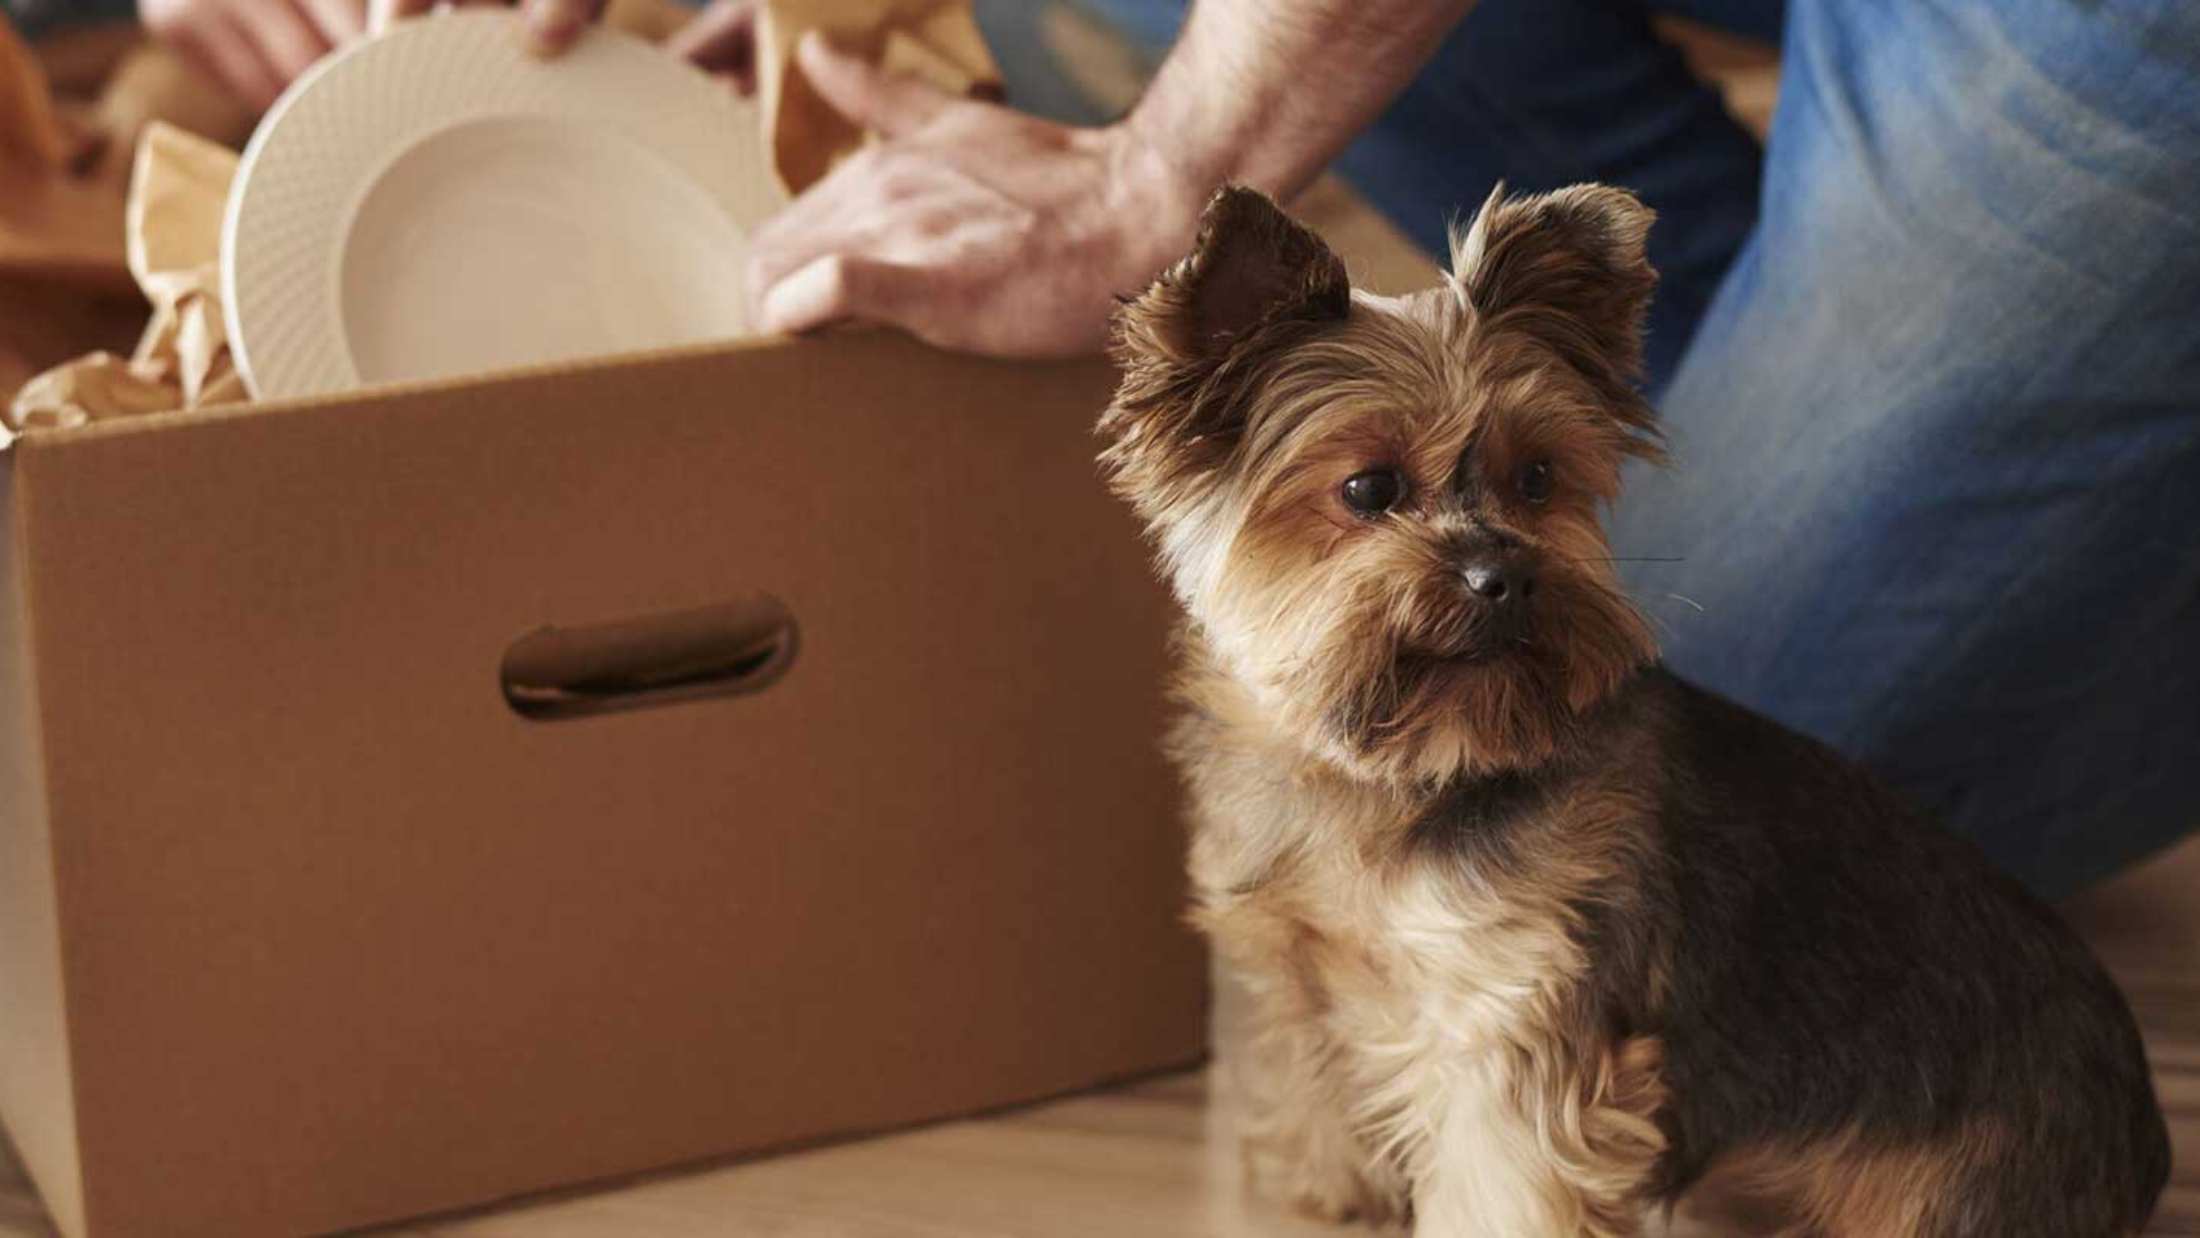 A dog sitting in front of a box of kitchenware